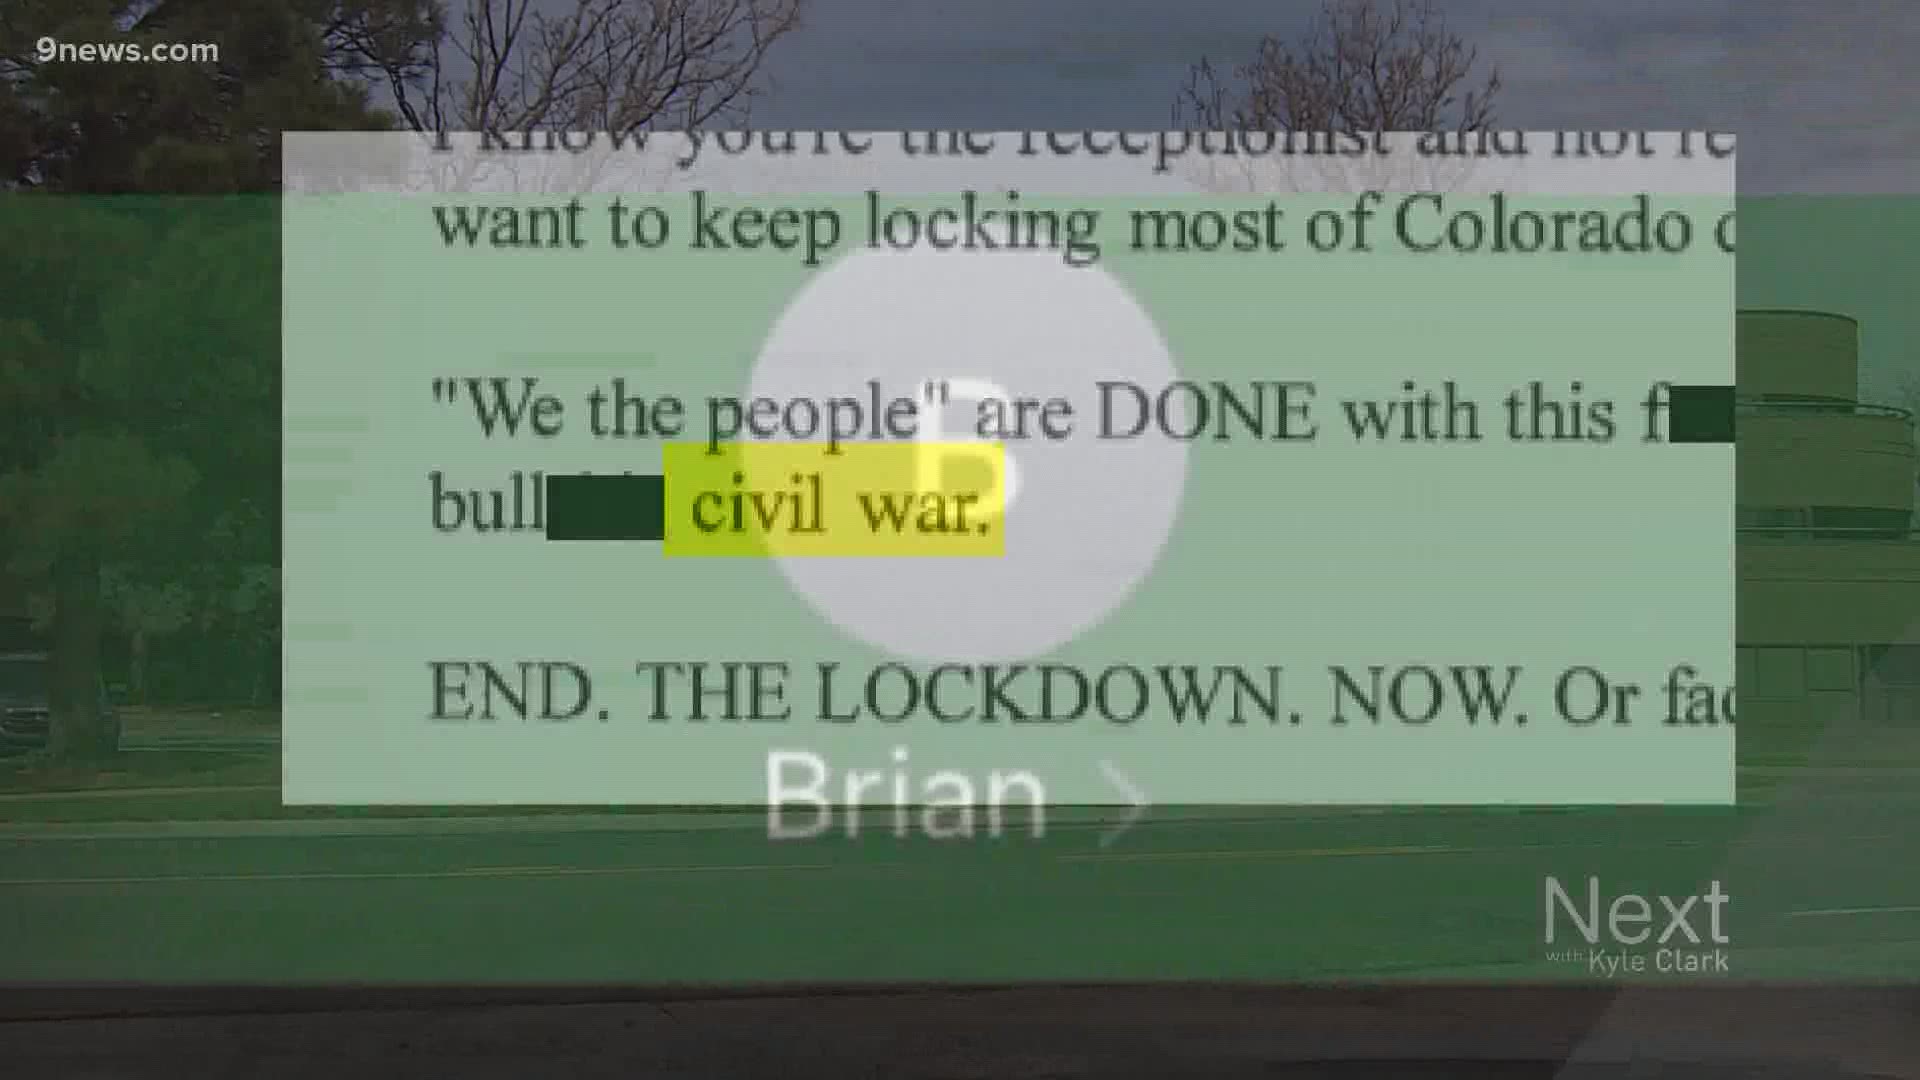 A man who emailed a threat of “civil war” if public health officials did not lift a stay-home order said that he was sending "warning signals to elected officials."